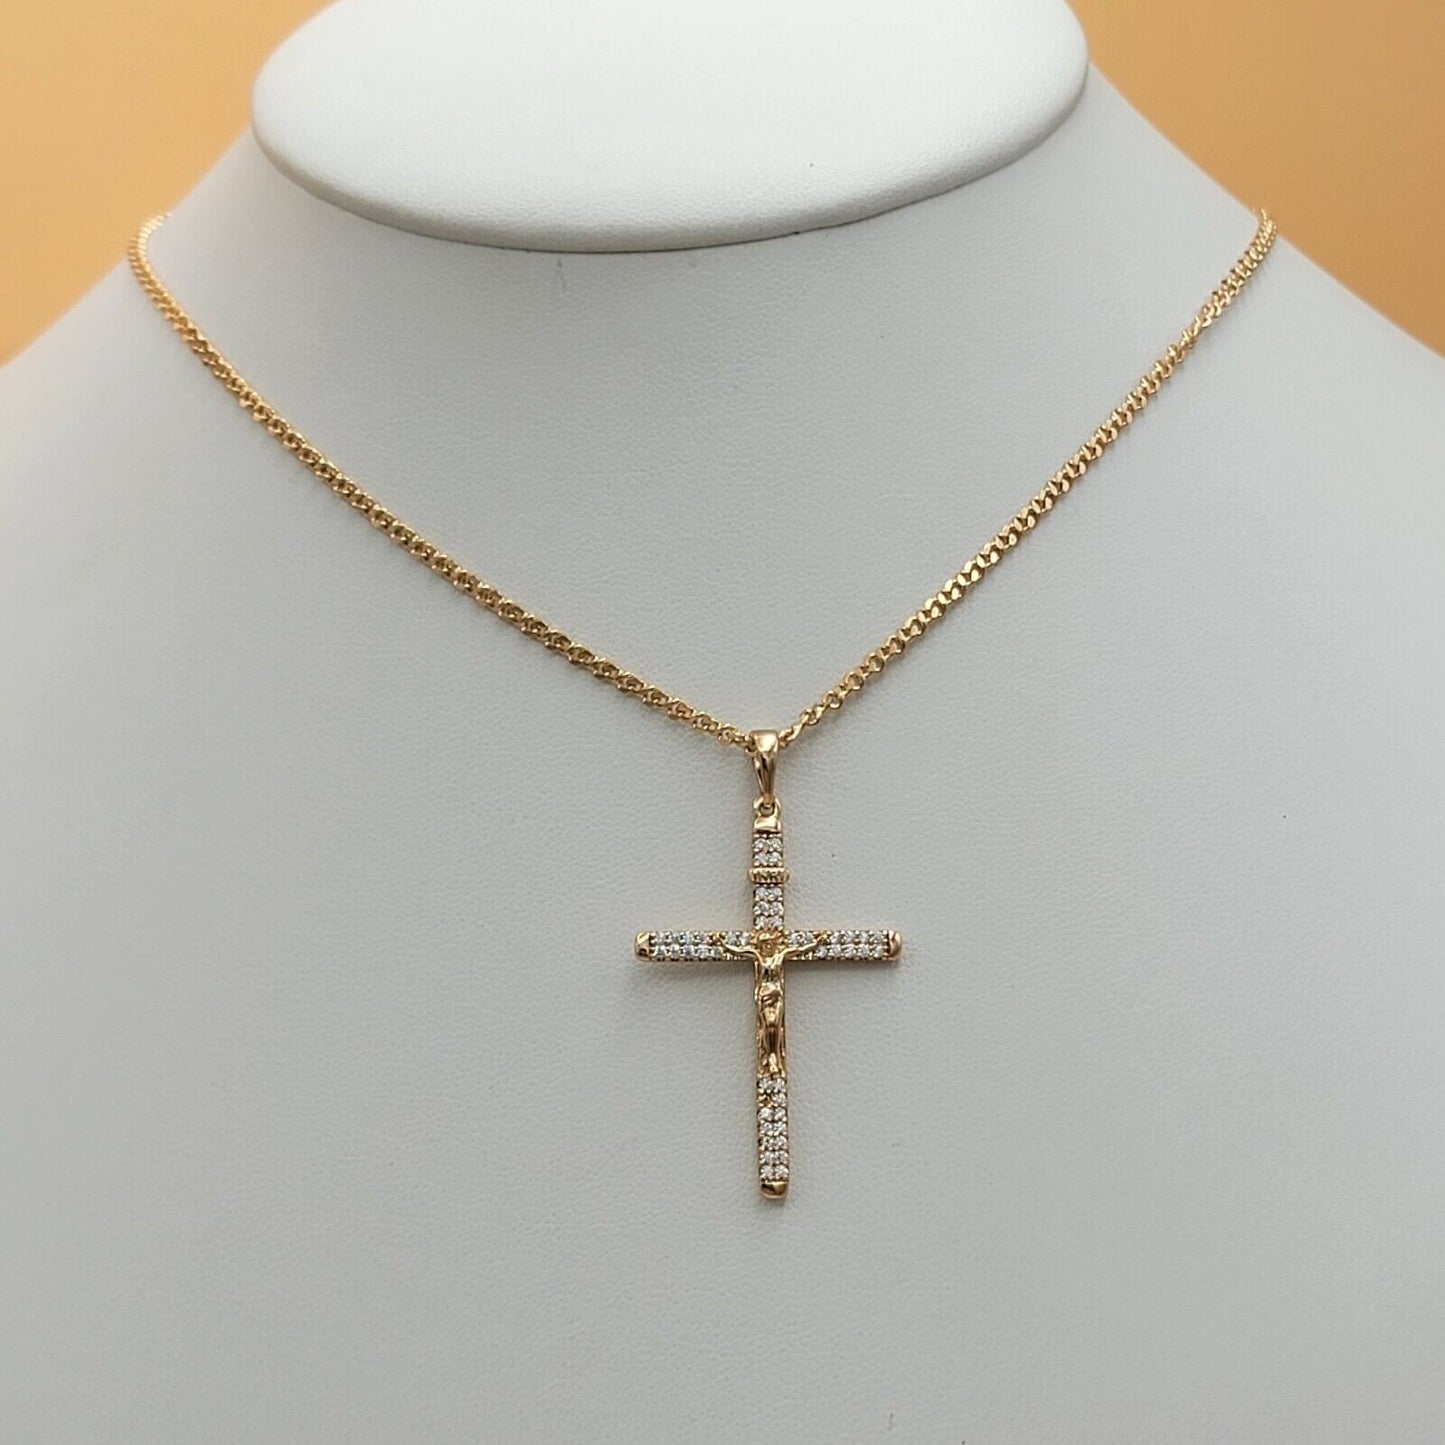 Necklaces - 18K Gold Plated. Crucifix Jesus Cross crystals Pendant & Chain. Necklace.